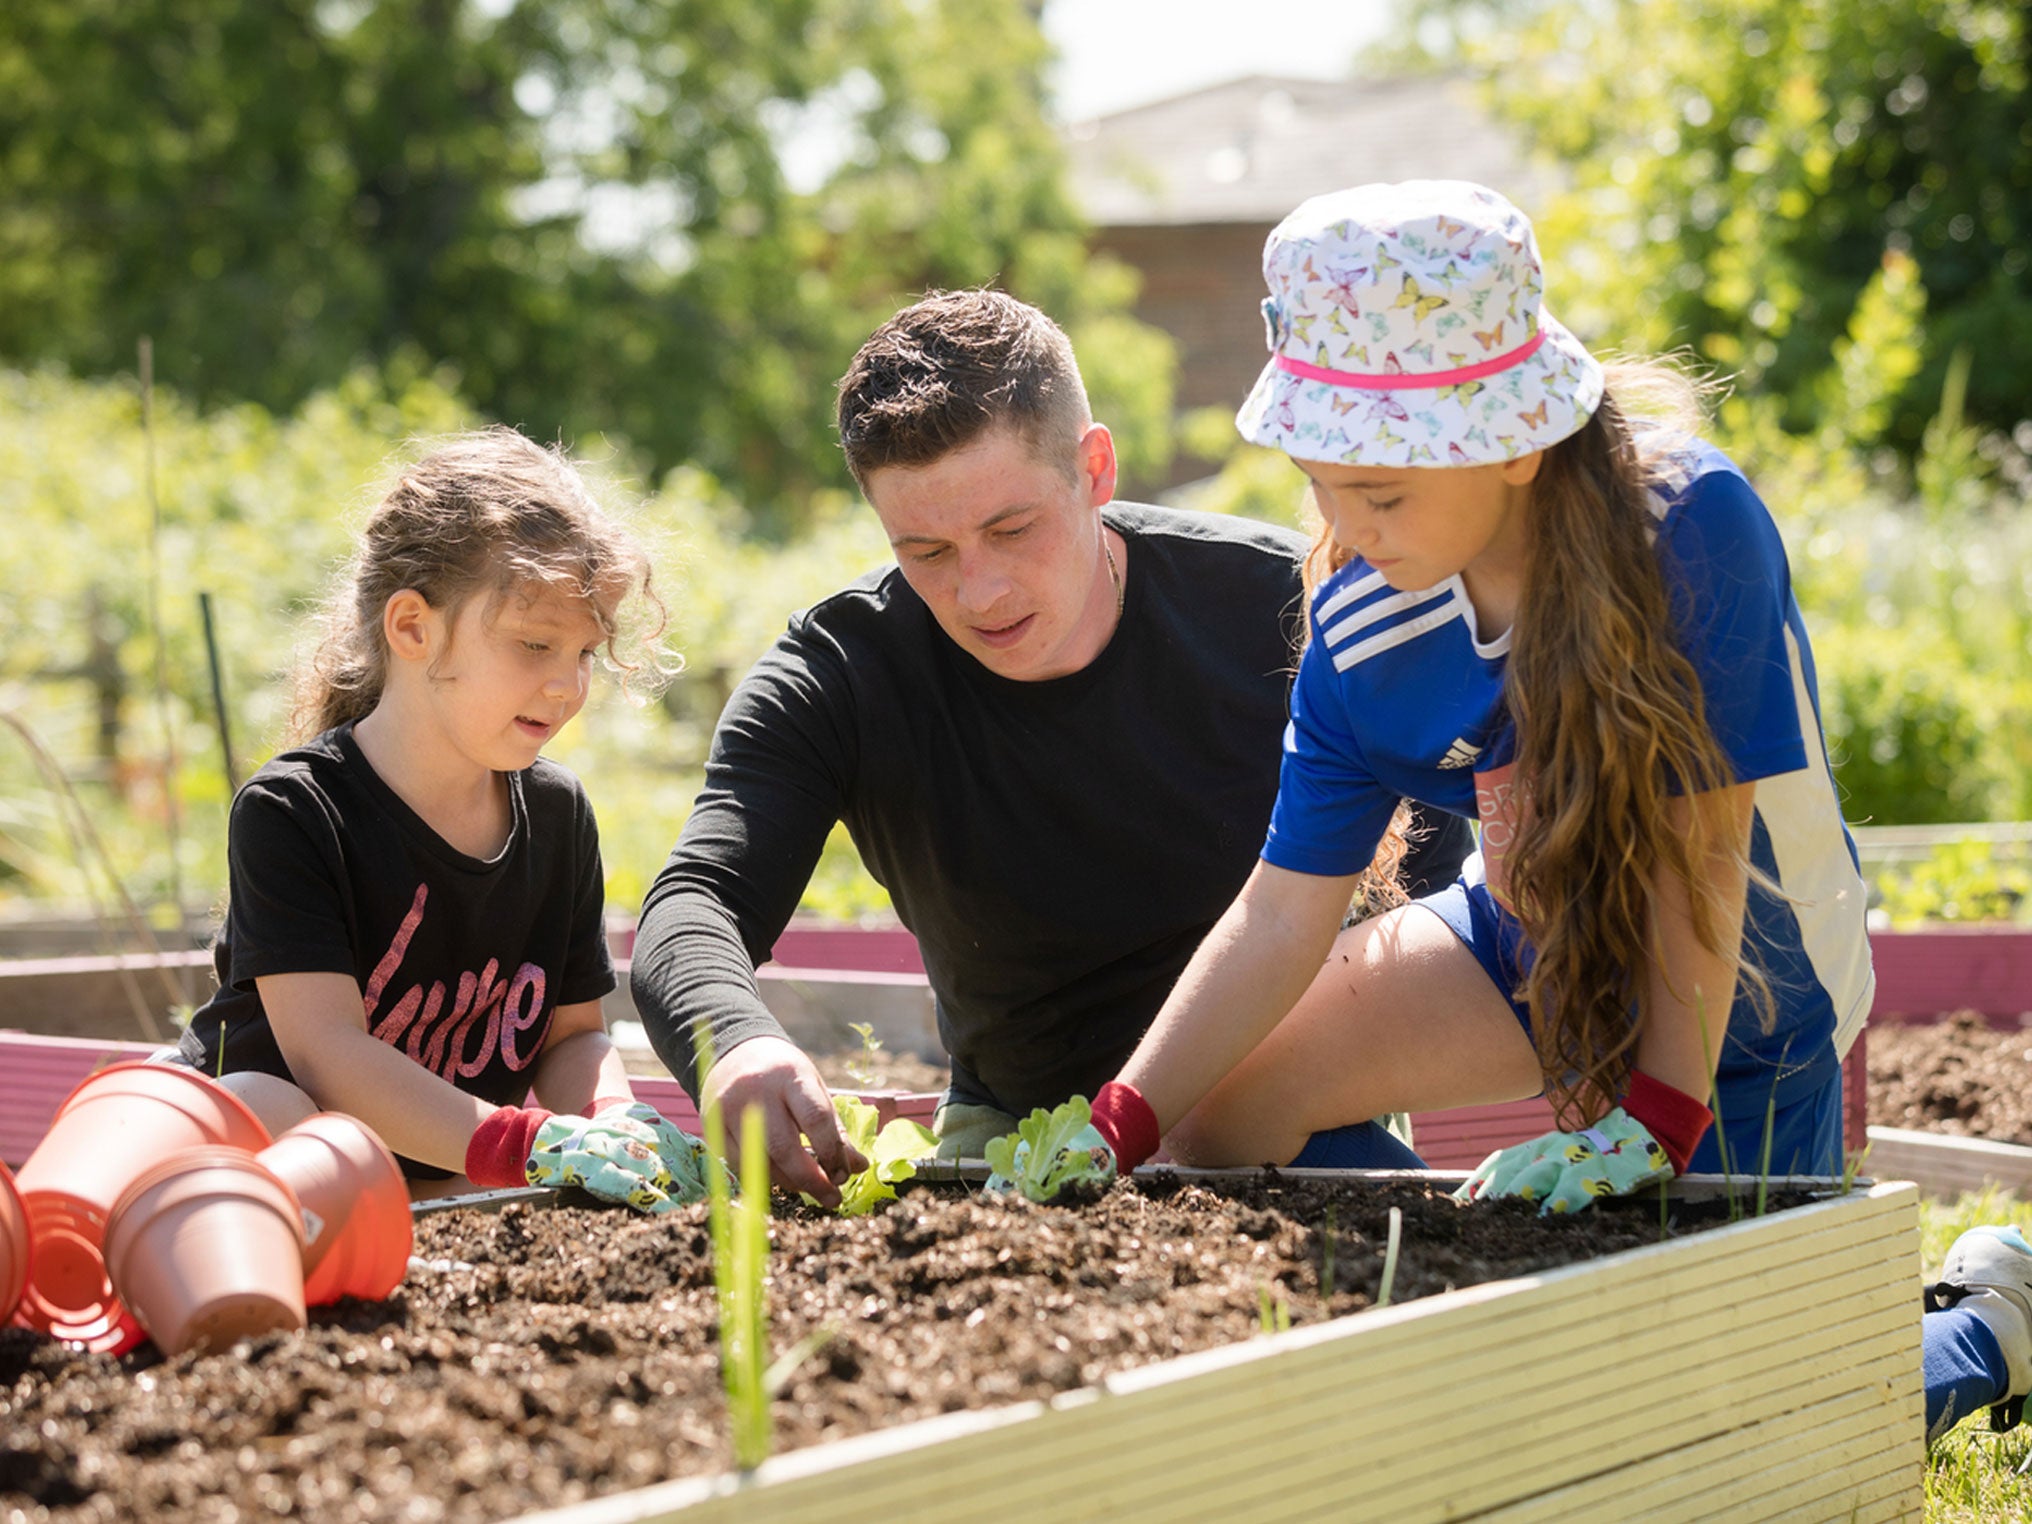 Father and daughters planting vegetables in a planter